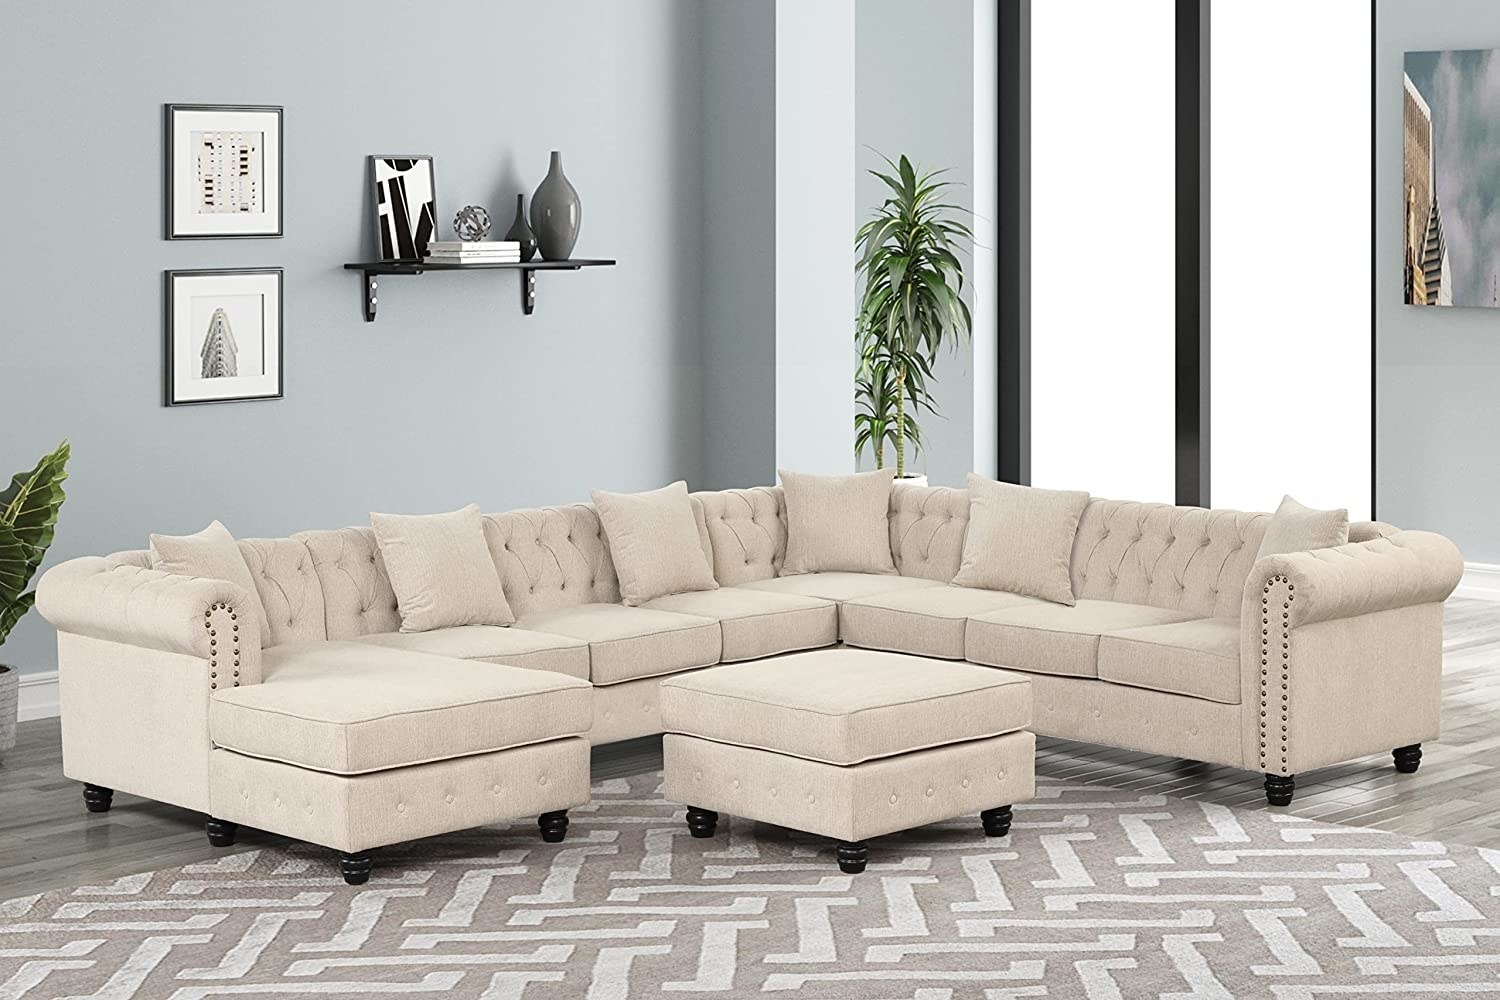 A traditional beige sectional